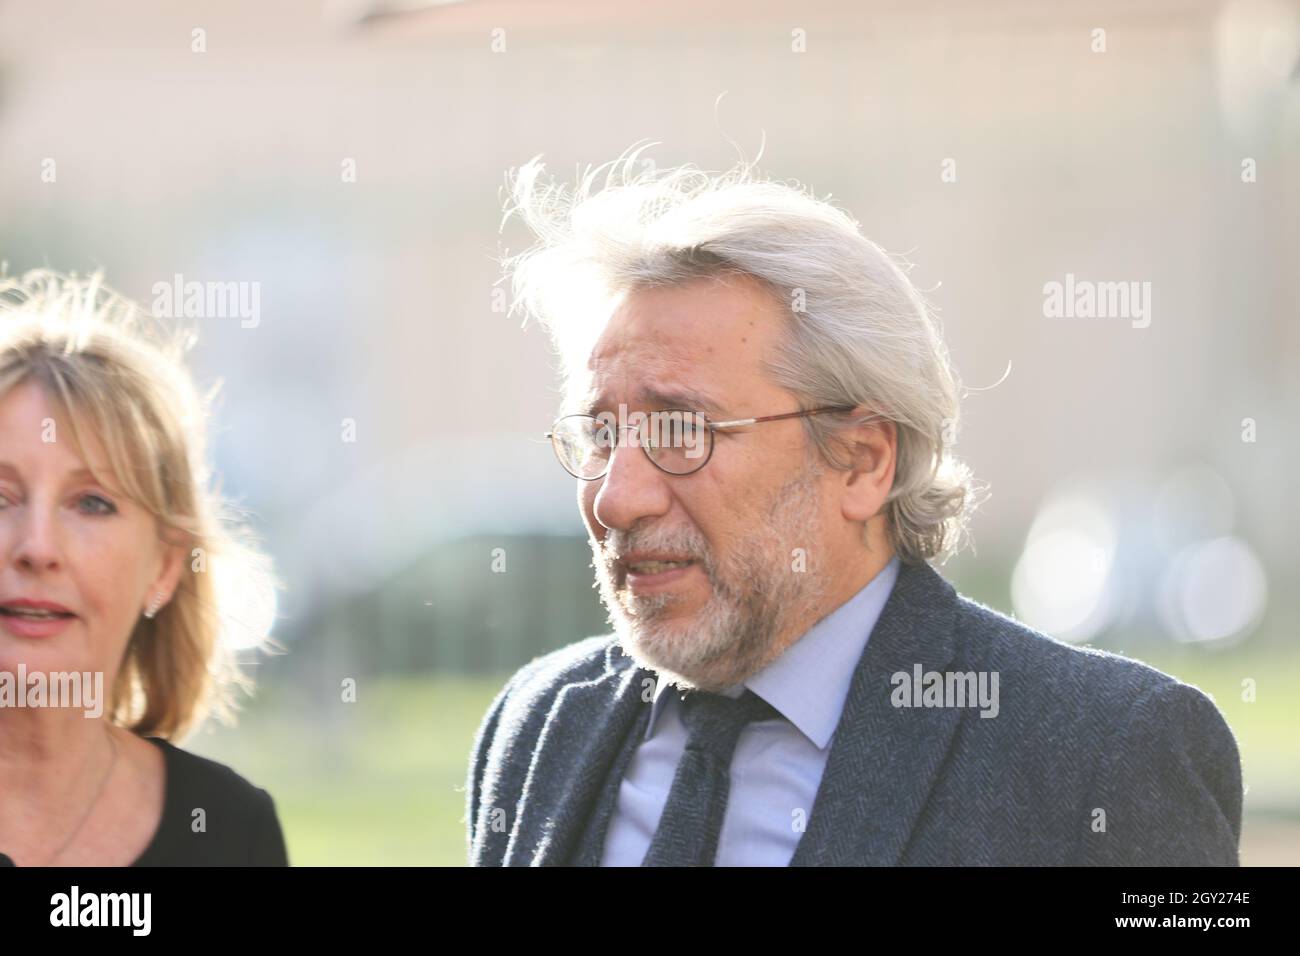 10/06/2021, Potsdam, Germany. Can Dündar before the M100 Special Talk 'The Totalitarian Temptation'. The special talk takes place as part of the international media conference M100 Sanssouci Colloquium, in the palace theater of the New Palace in Sanssouci Park. Stock Photo